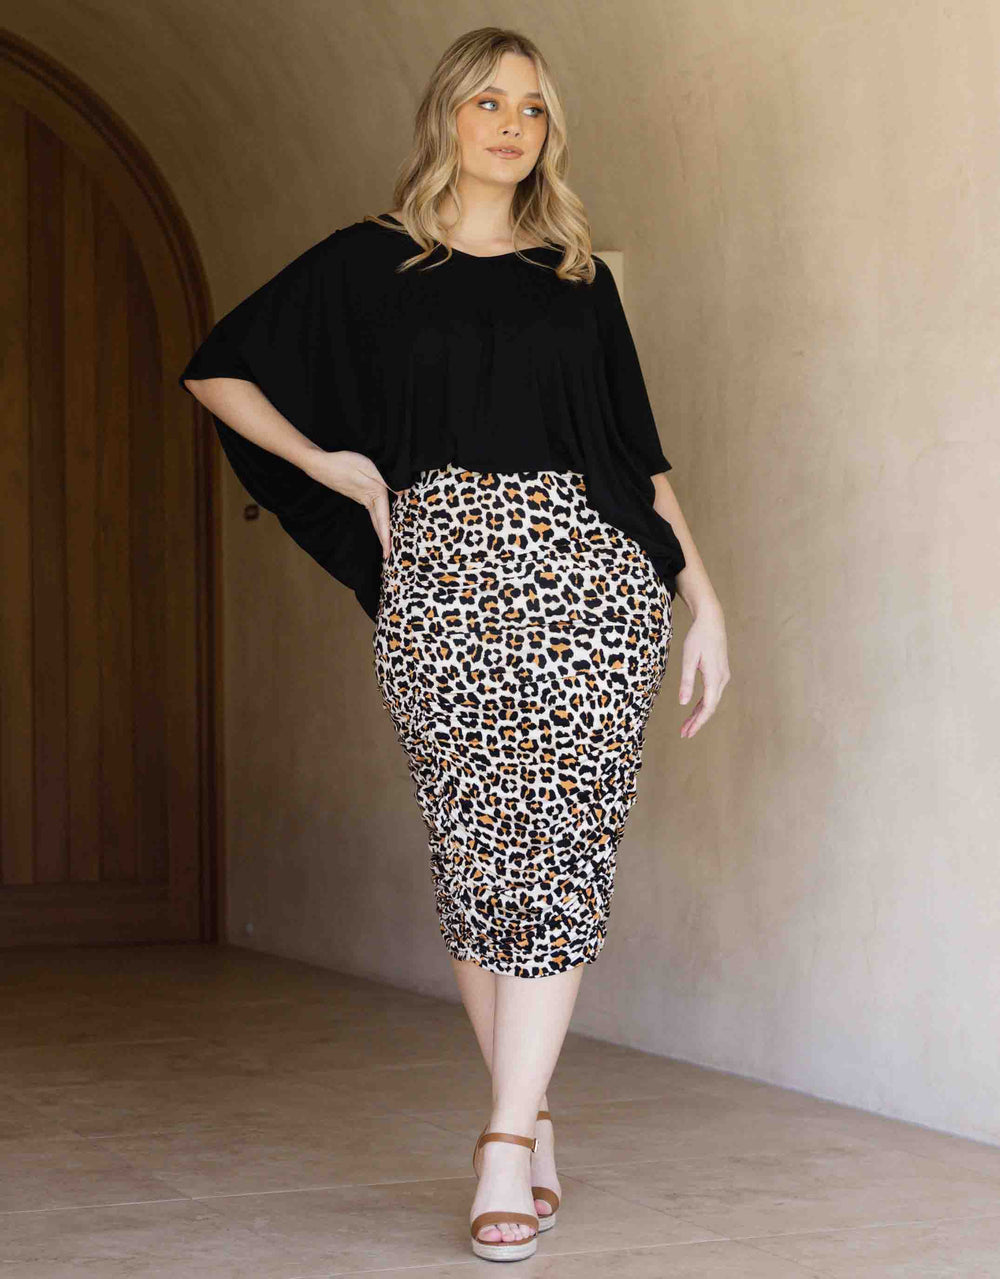 PQ Collection Plus Size Vanity Skirt Women's Tops | Plus Size Clothing